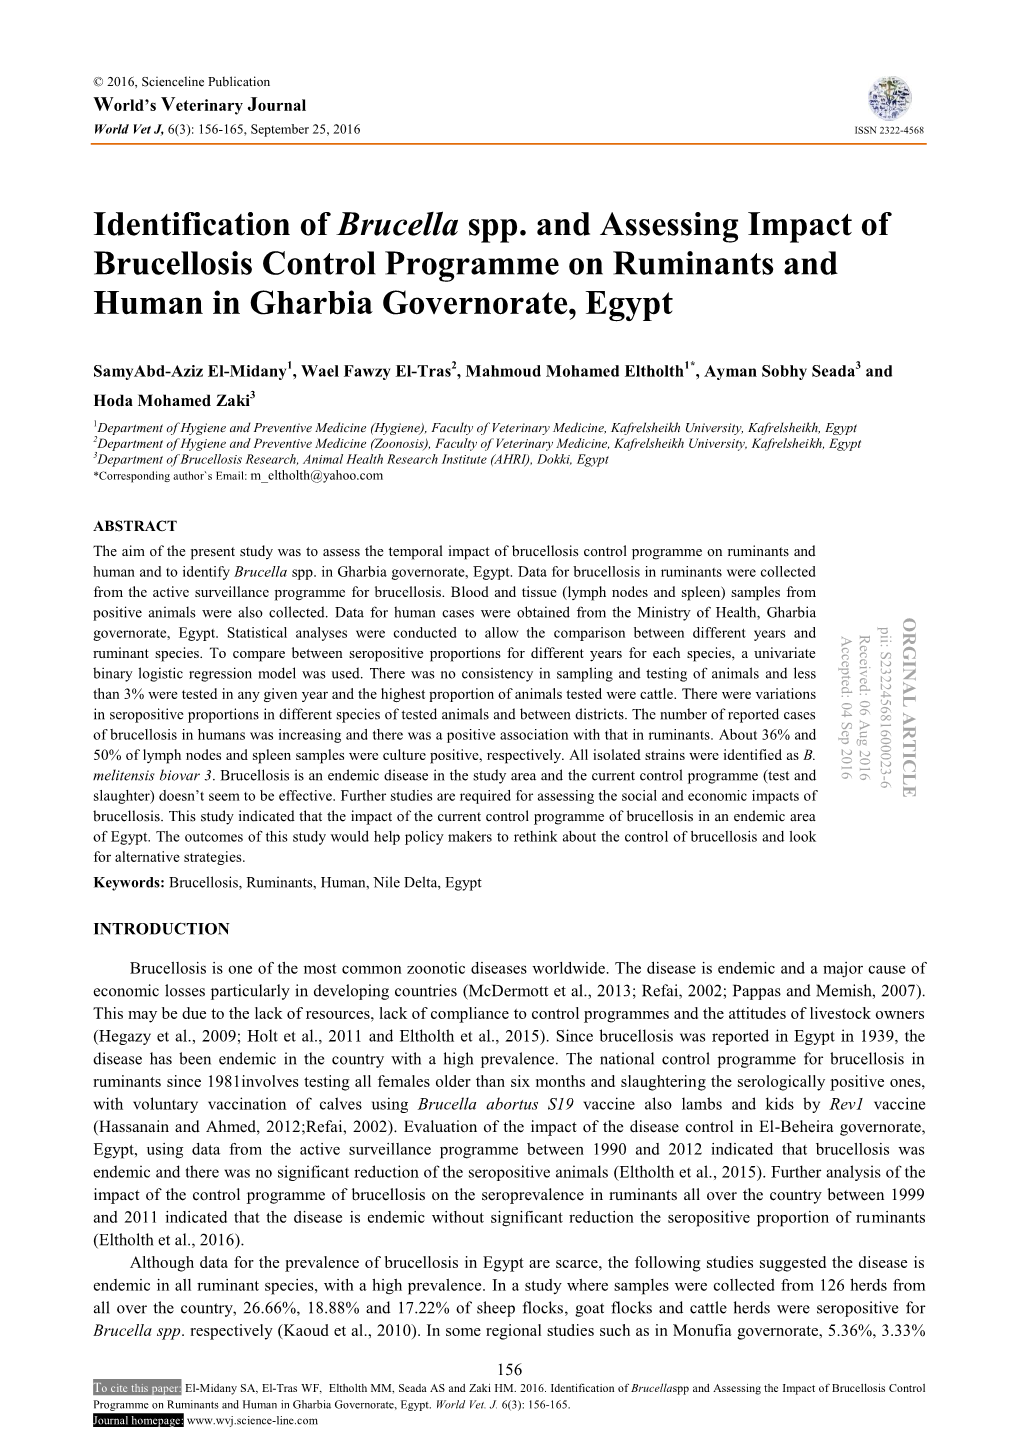 Identification of Brucellaspp and Assessing the Impact of Brucellosis Control Programme on Ruminants and Human in Gharbia Governorate, Egypt